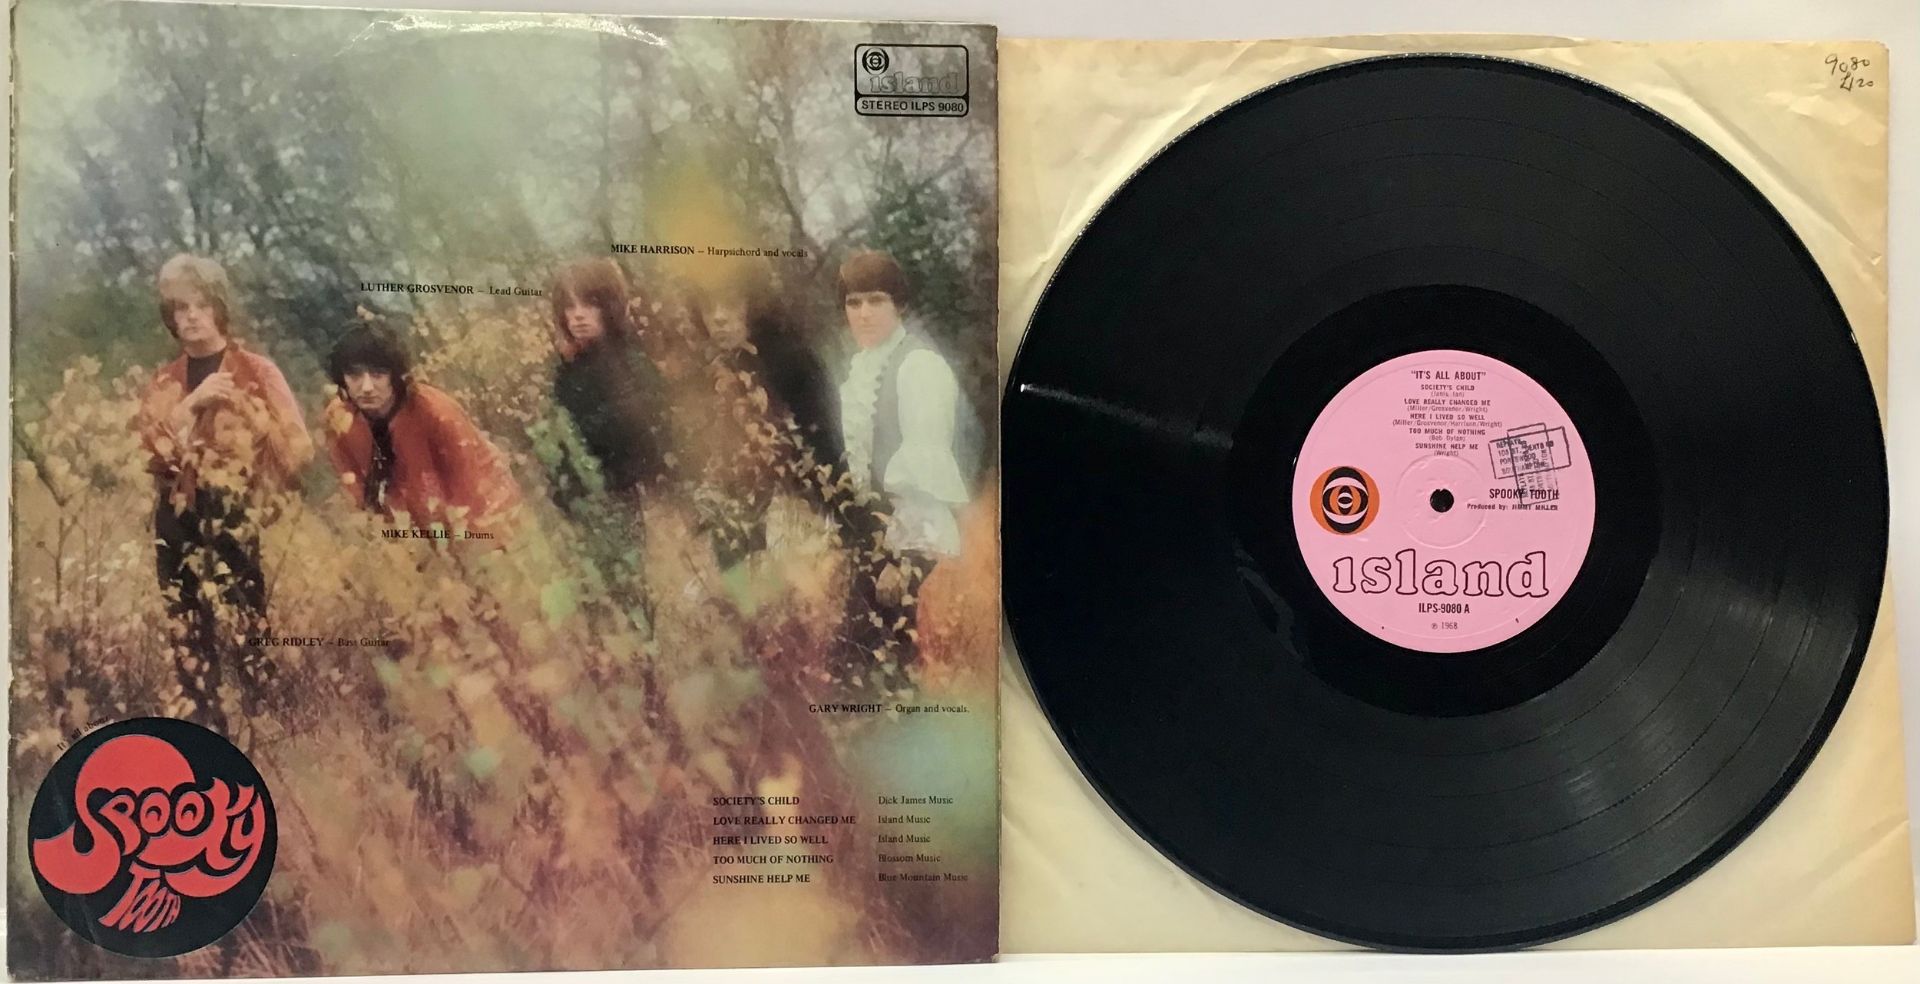 SPOOKY TOOTH " IT'S ALL ABOUT" VINYL LP. Rare Original UK First Pressing on the Pink Eye Island